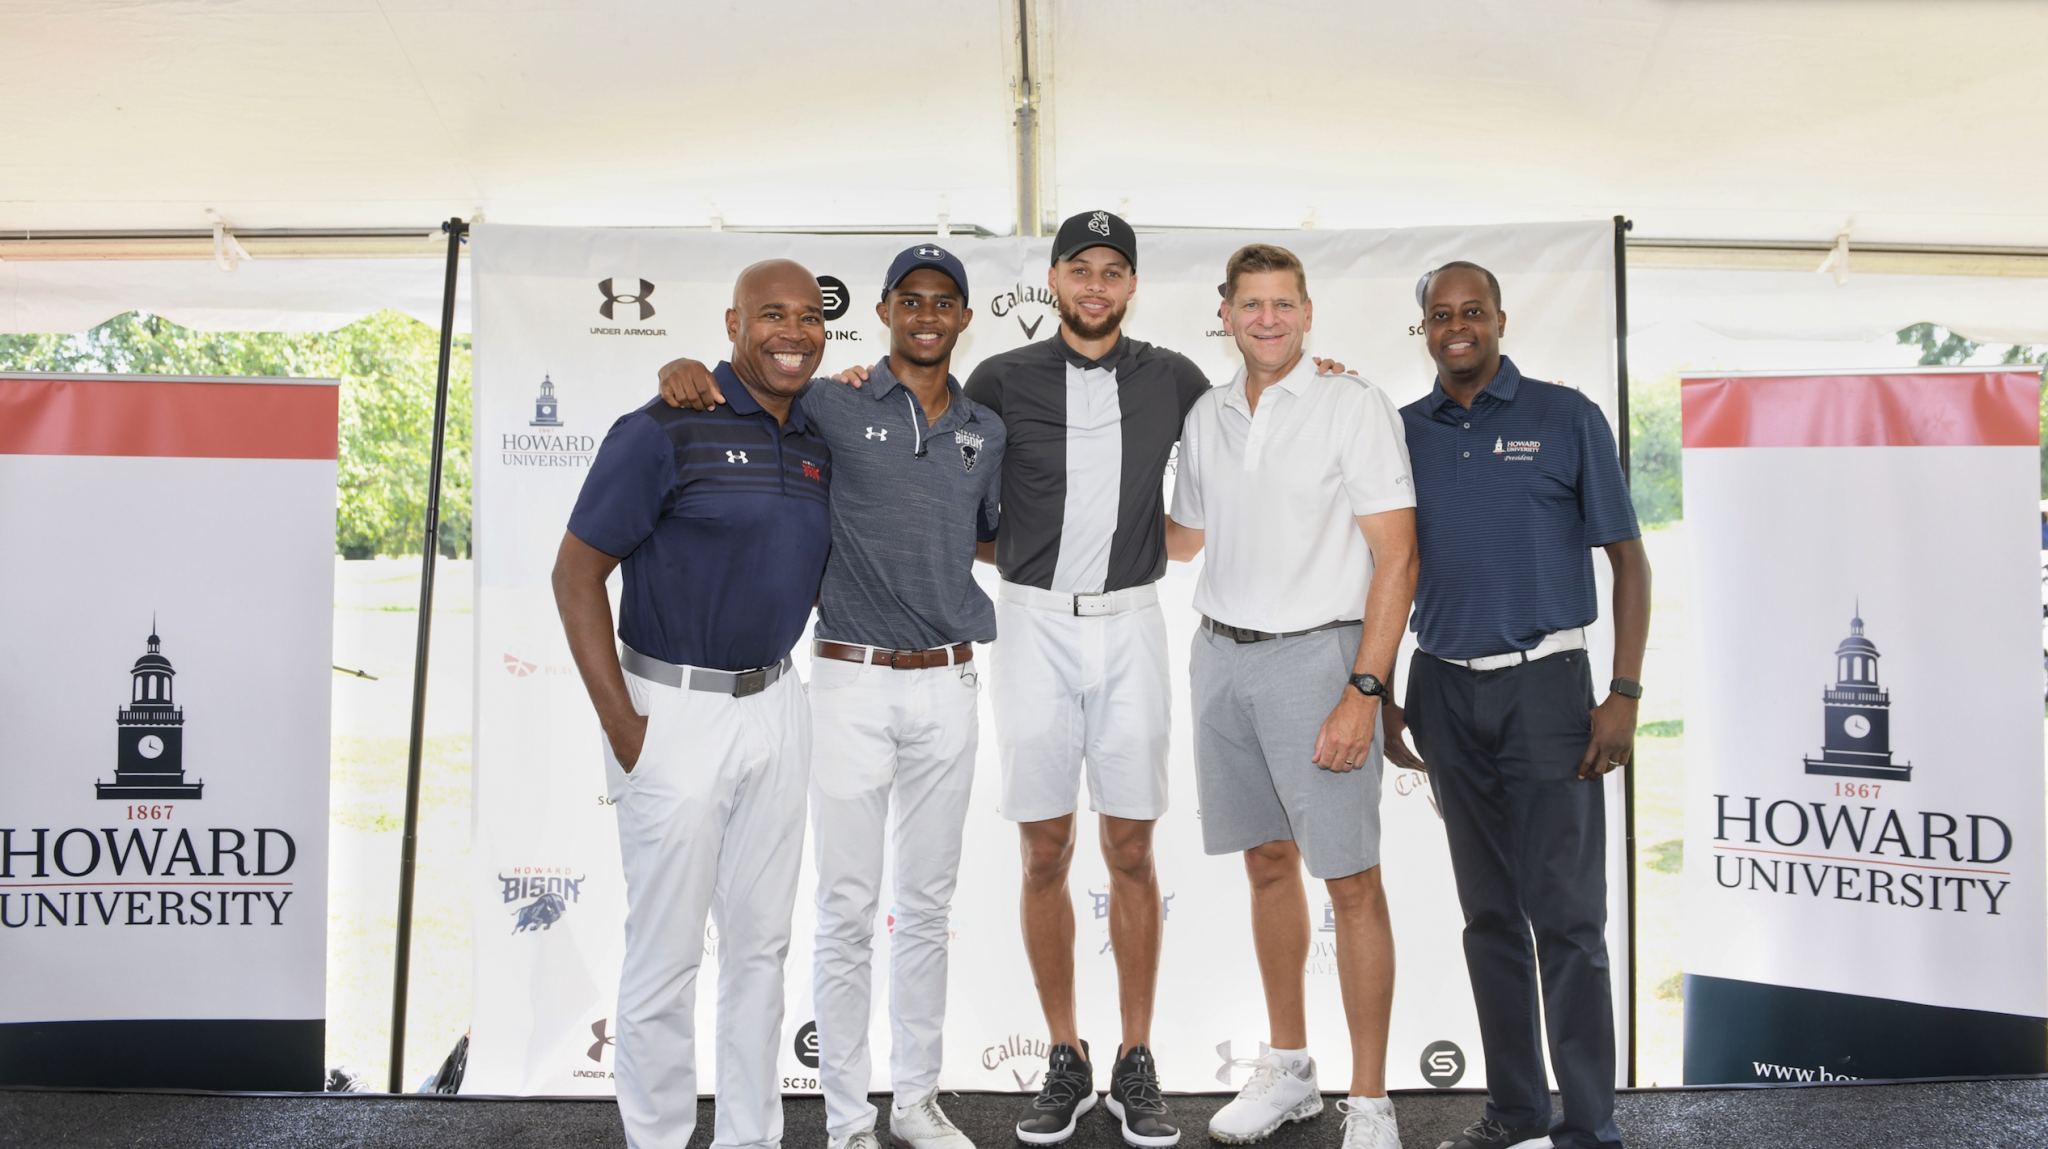 Basketball Star Curry Supports Howard University Golf Team